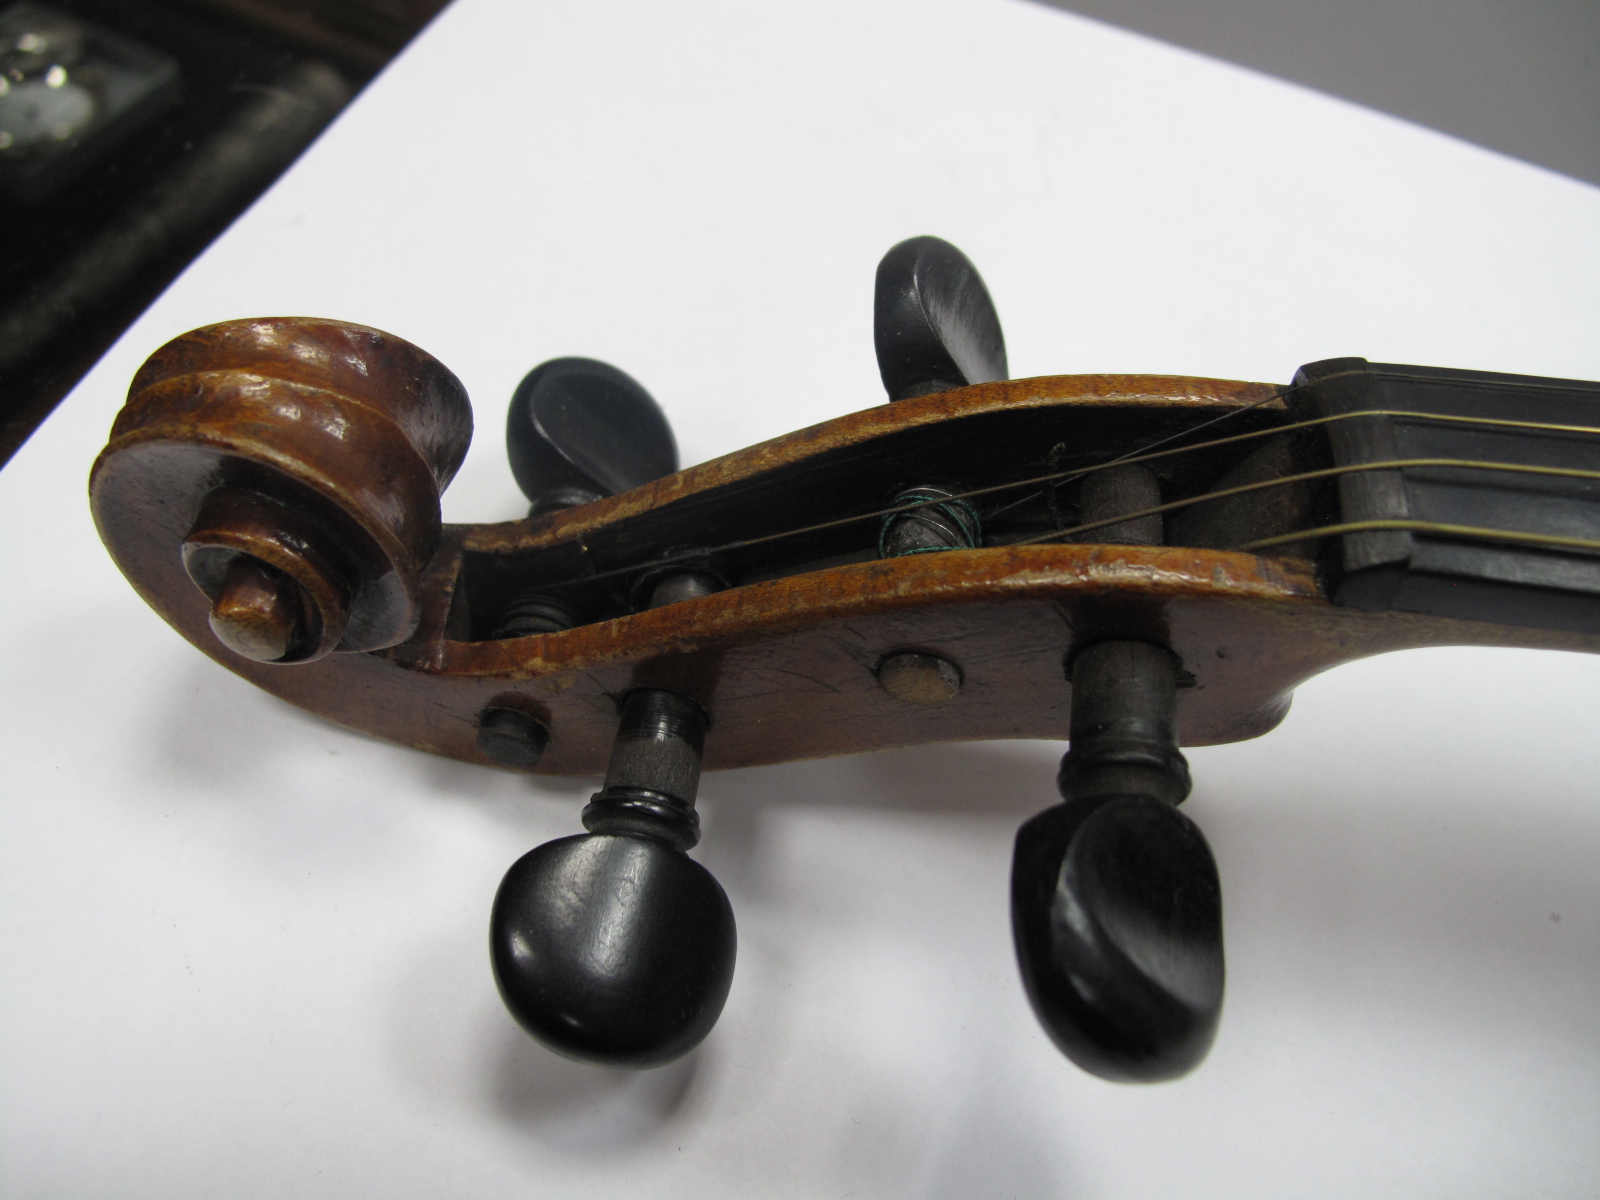 An Early XX Century Violin, with two piece back, bears label "Copy of Jacobus Steiner, - Image 3 of 5